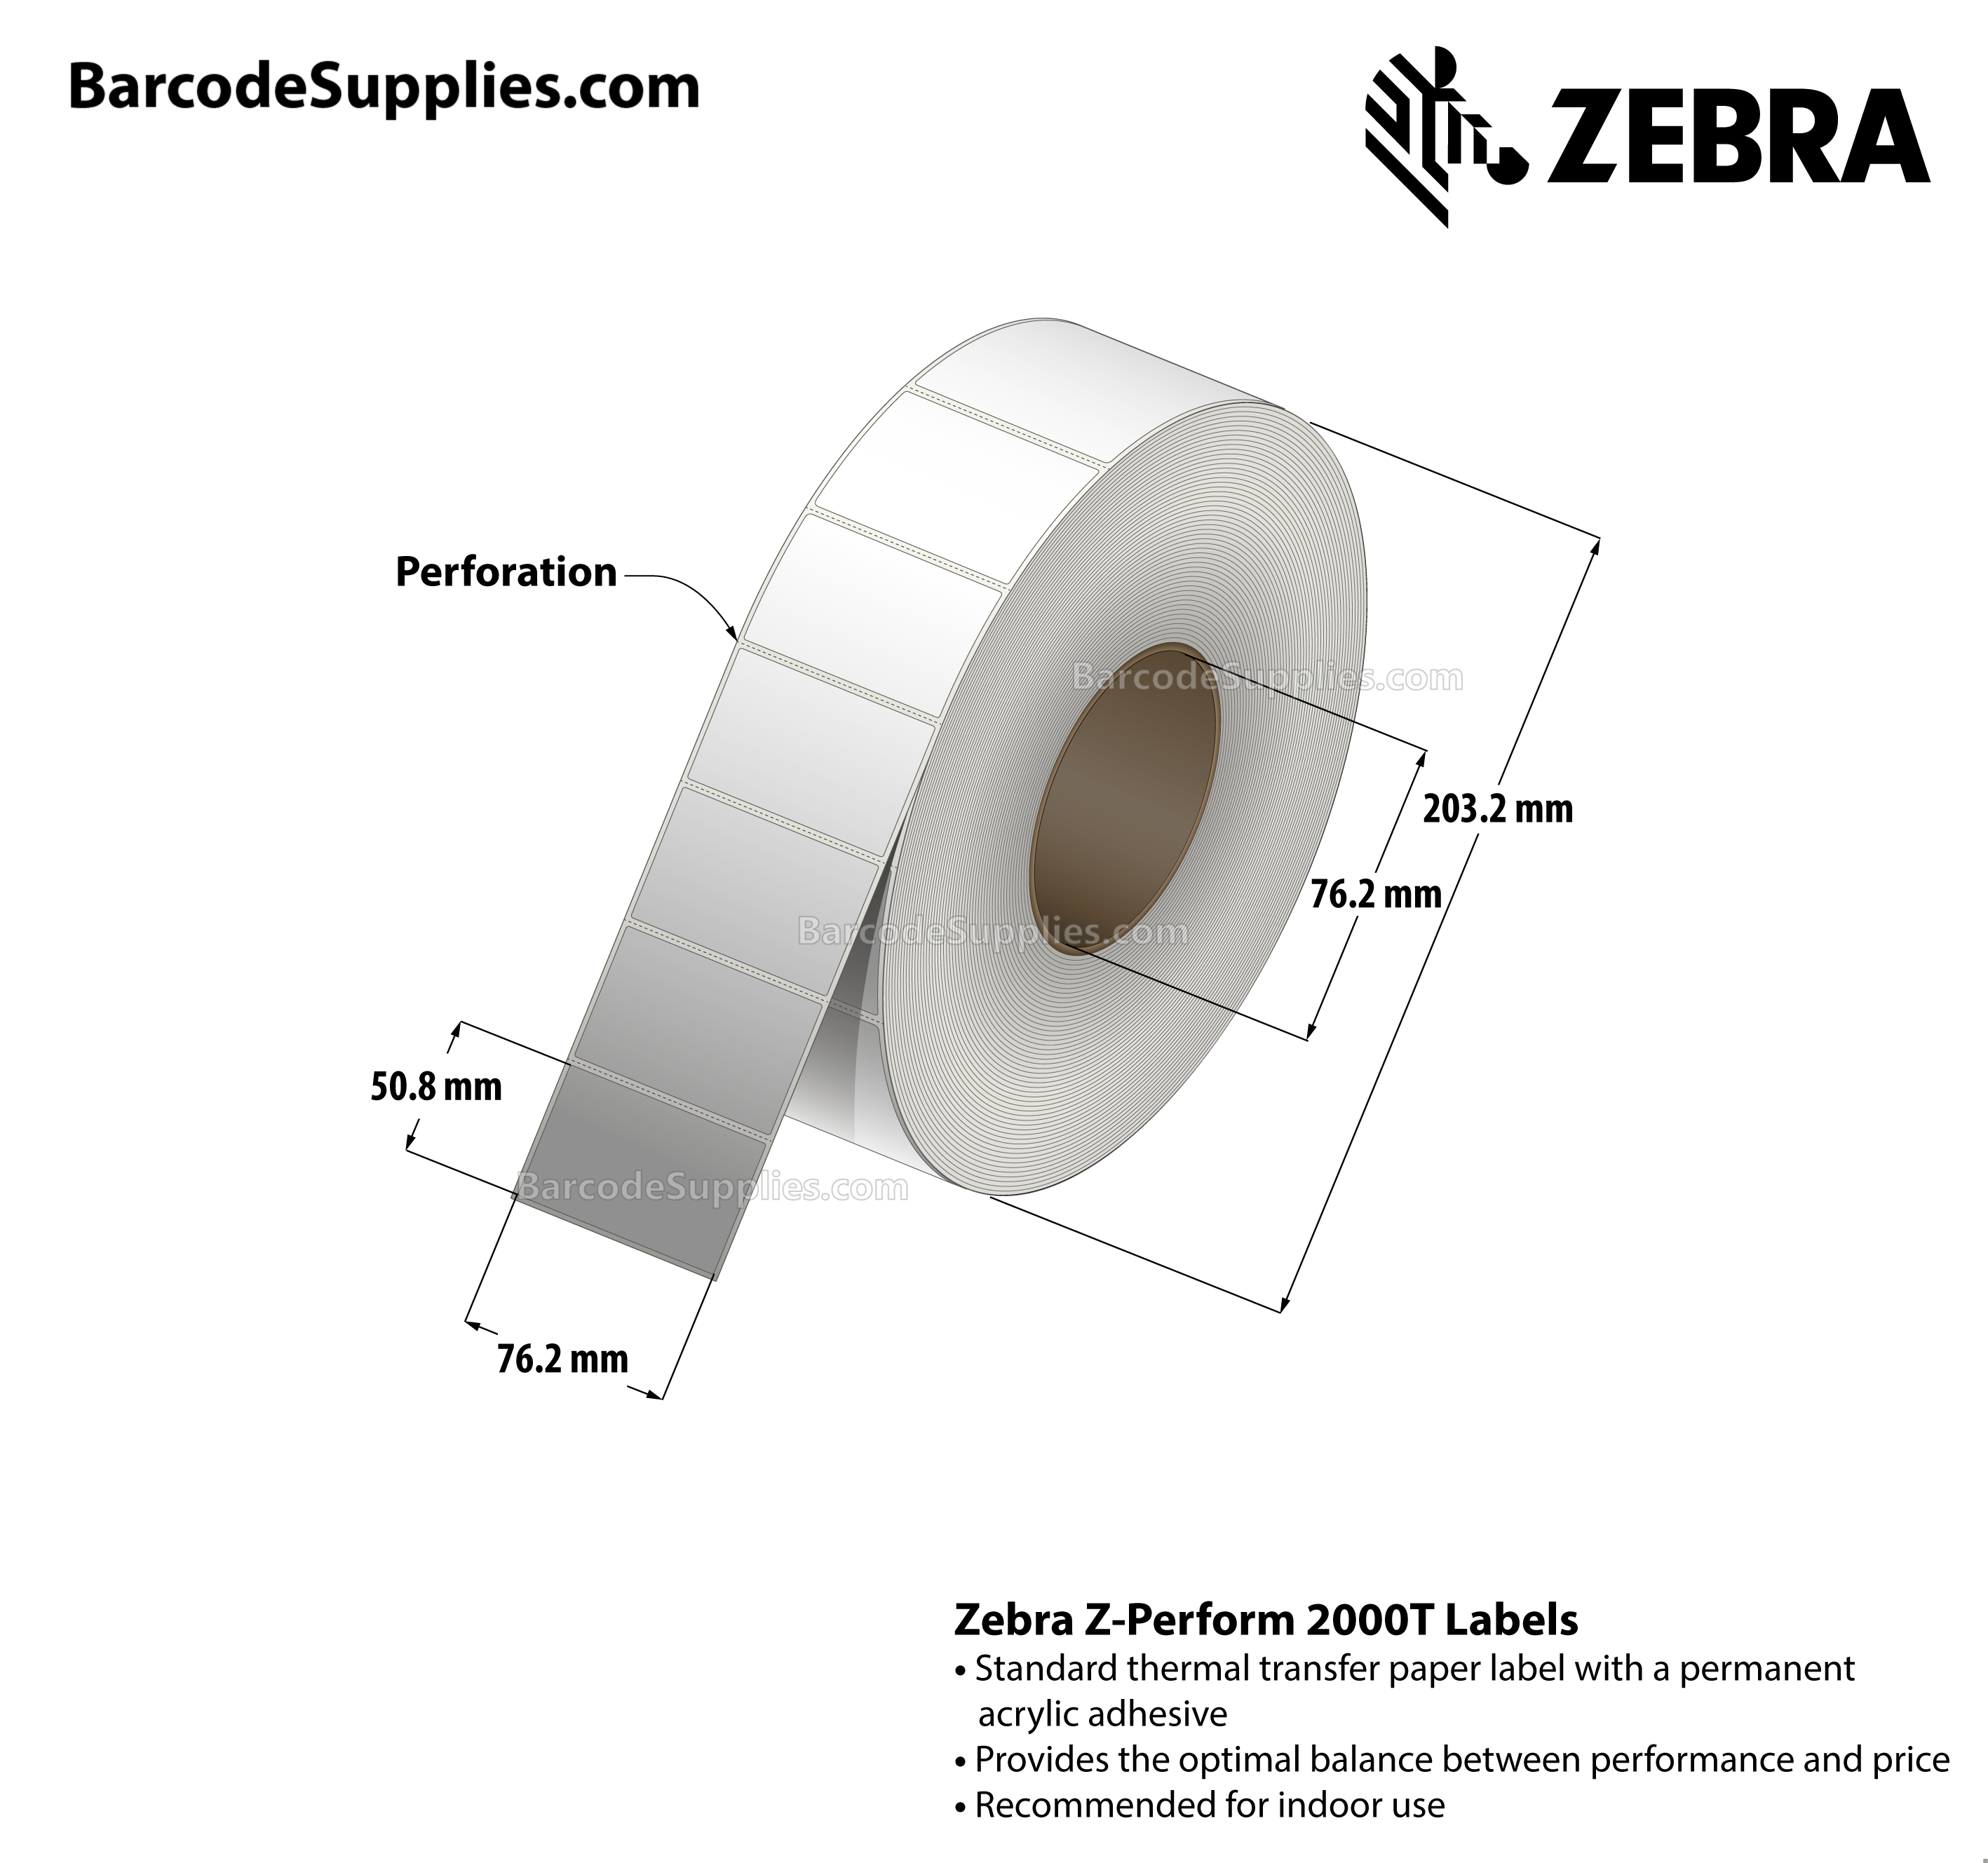 3 x 2 Thermal Transfer White Z-Perform 2000T Labels With Permanent Adhesive - Perforated - 2750 Labels Per Roll - Carton Of 6 Rolls - 16500 Labels Total - MPN: 10000286